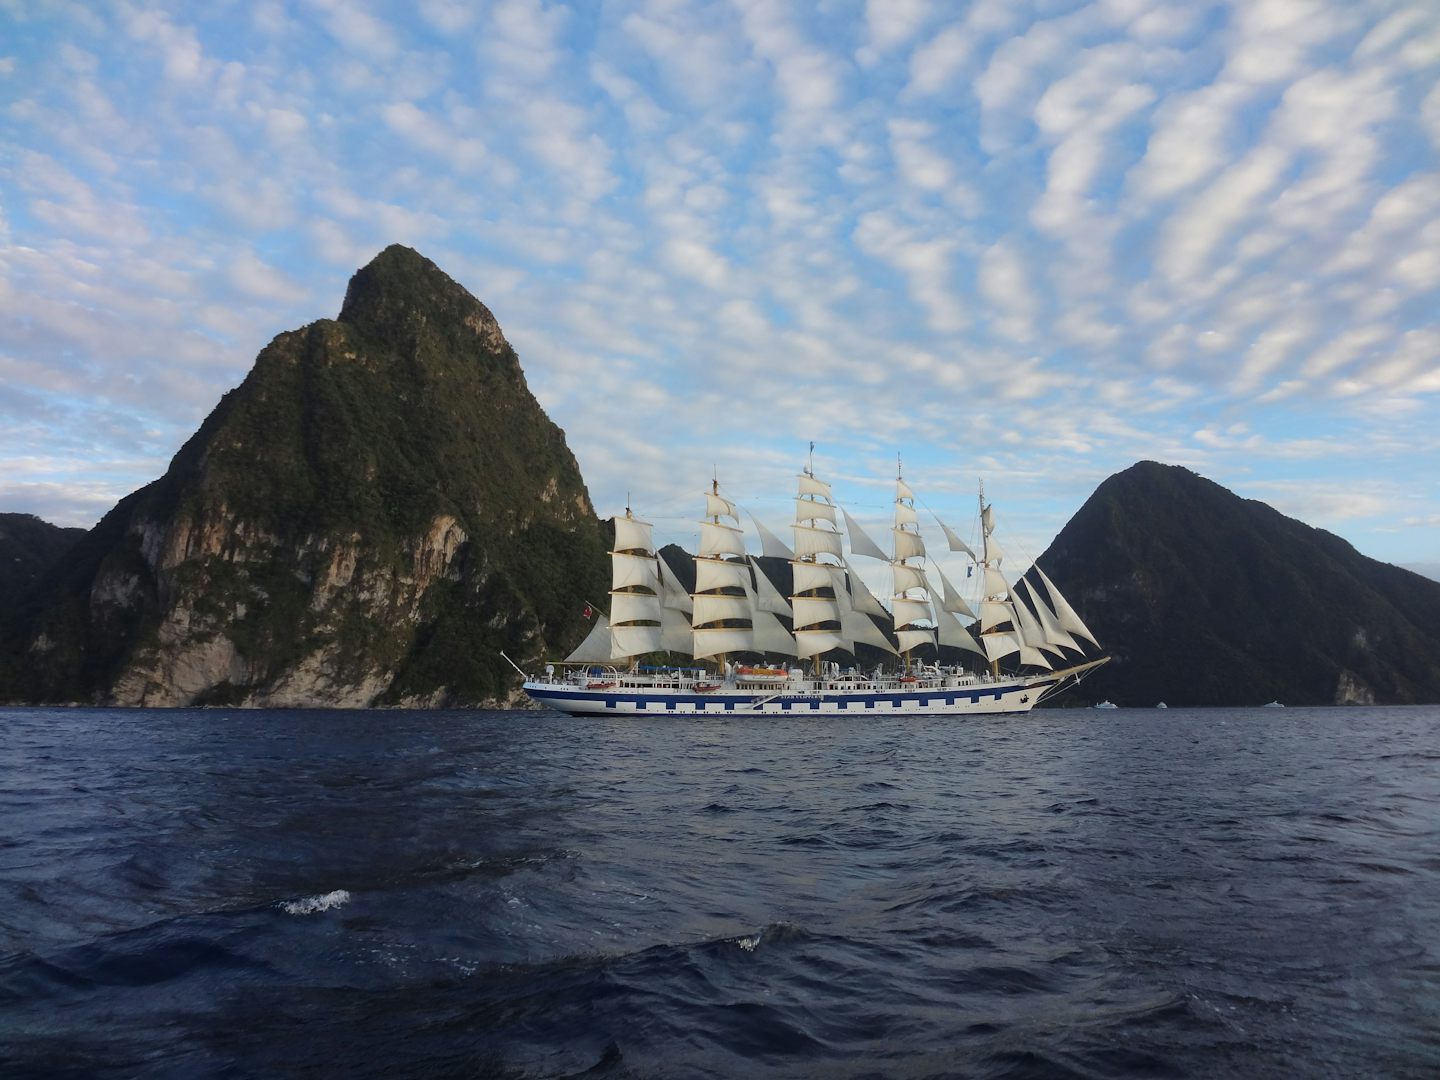 The Royal Clipper in full sail passing the Pitons in St. Lucia, we were in